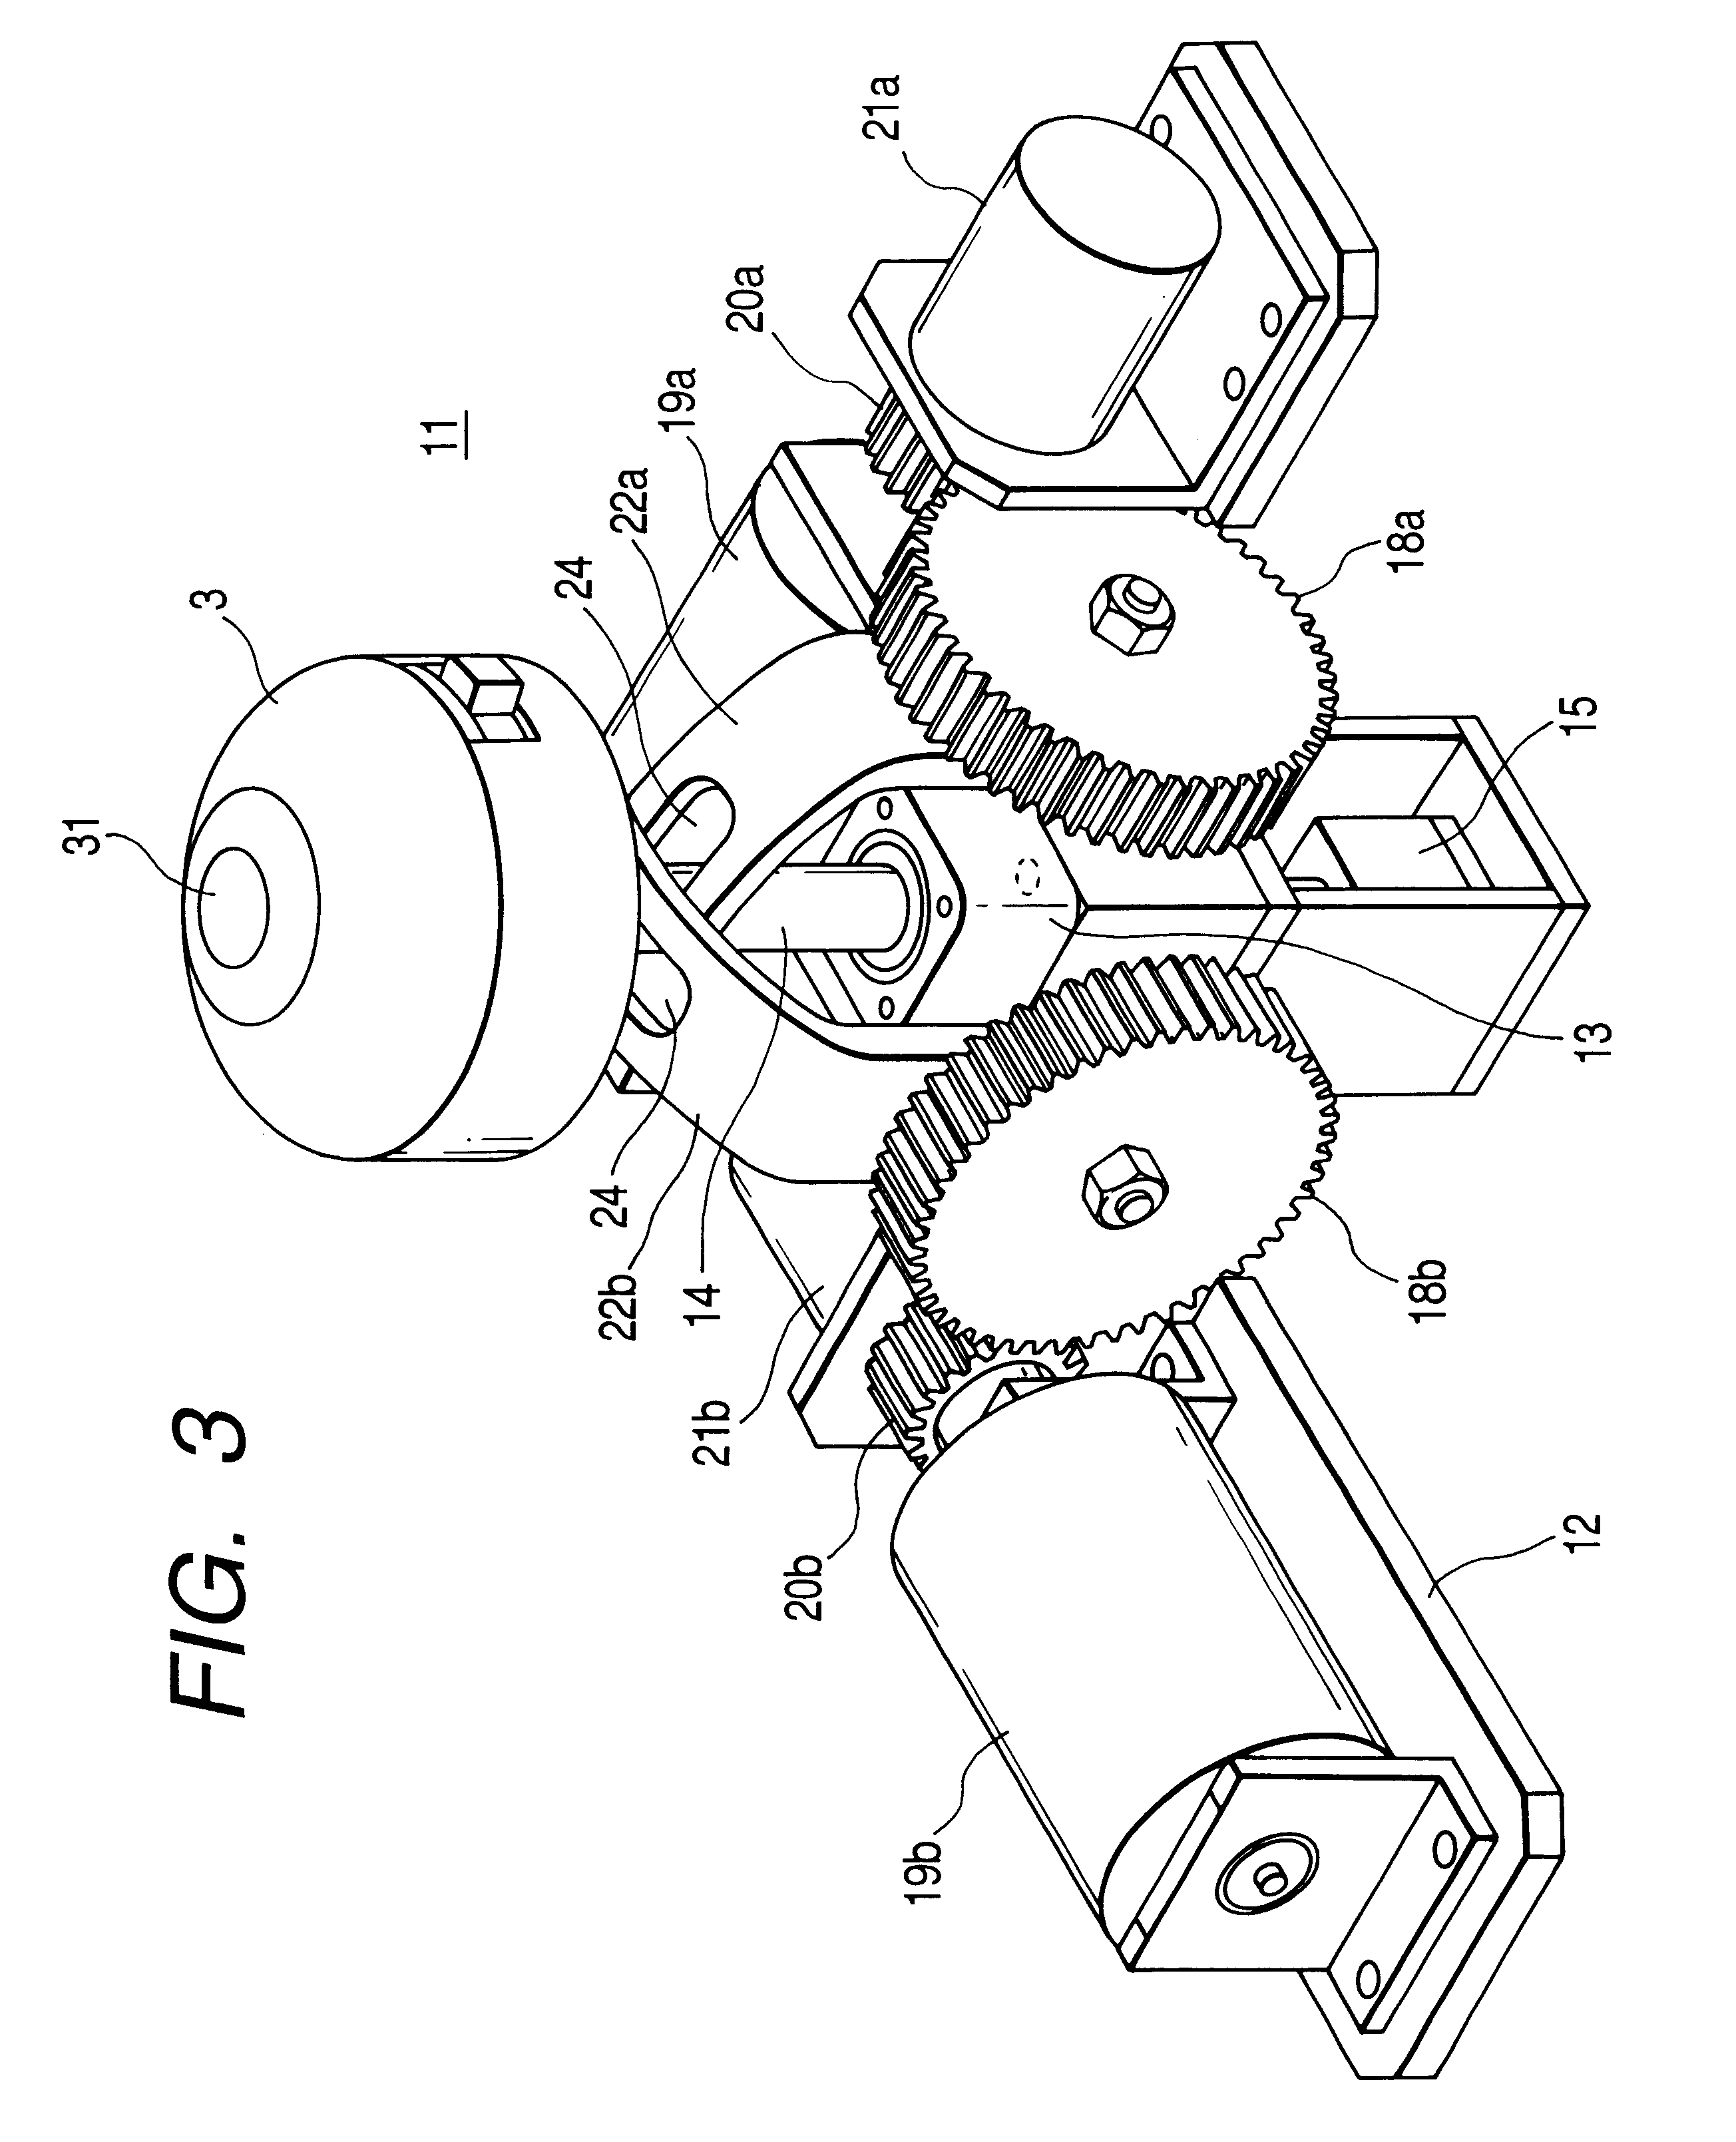 Vehicular input device including single manual operating unit for operating various electronic devices mounted on vehicle